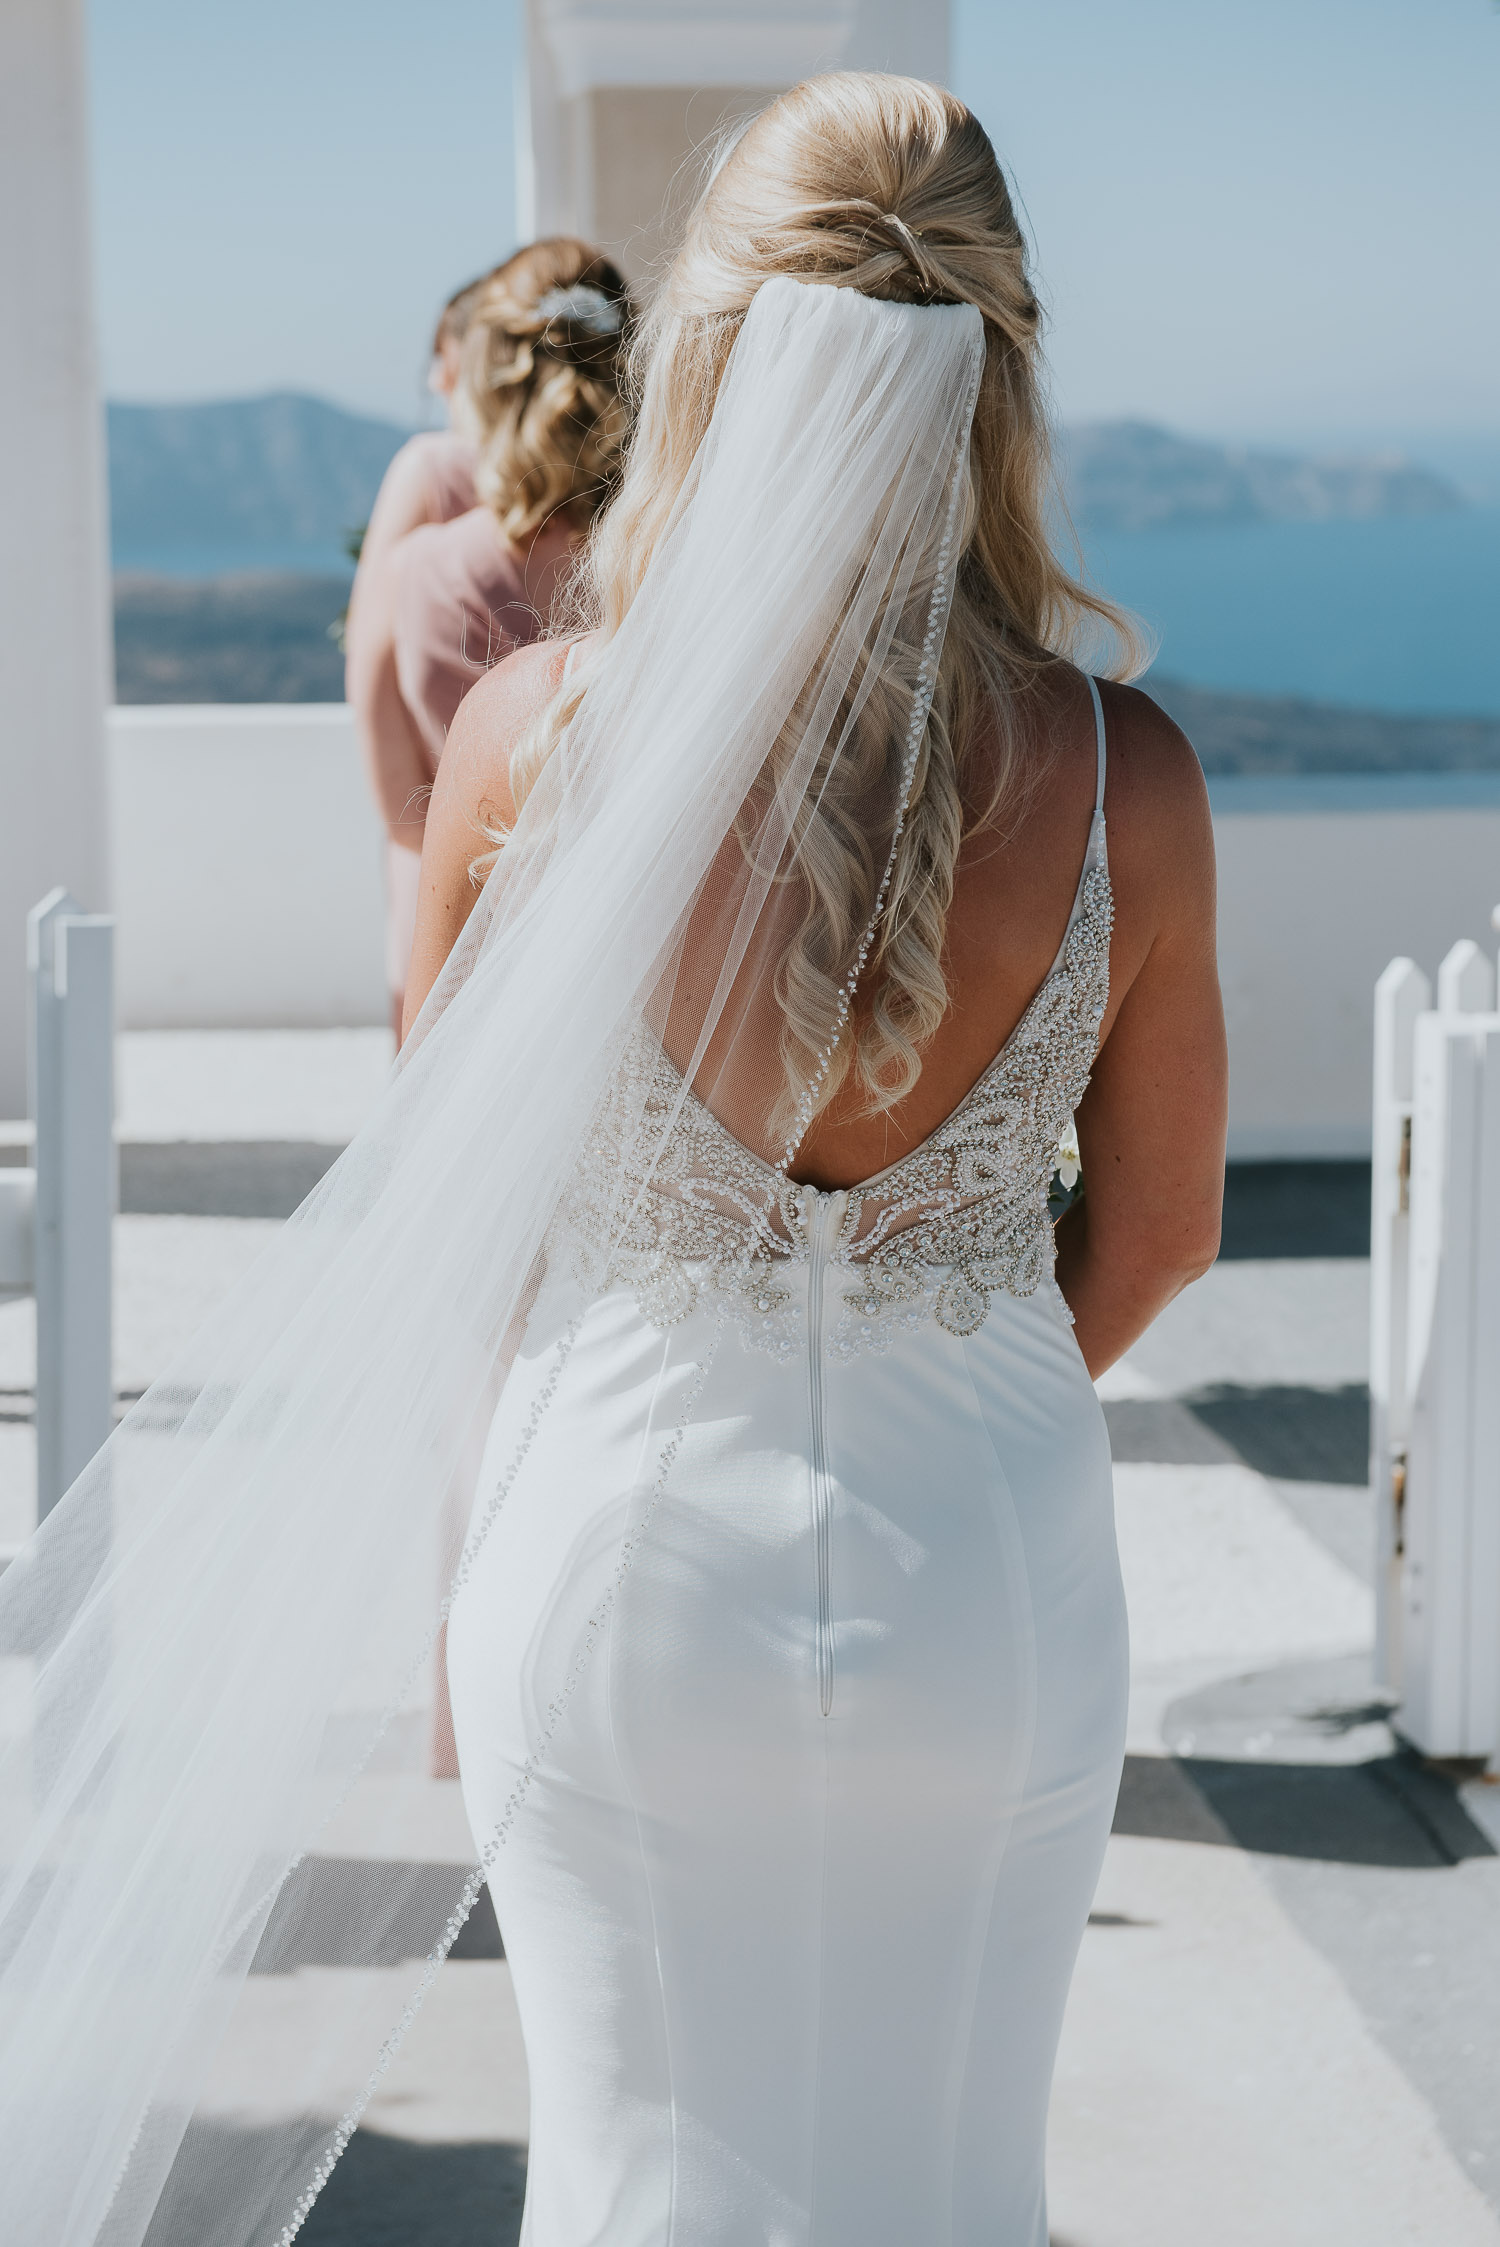 Wedding photographer Santorini: the back of the bride her dress with the veili in the wind by Ben and Vesna.